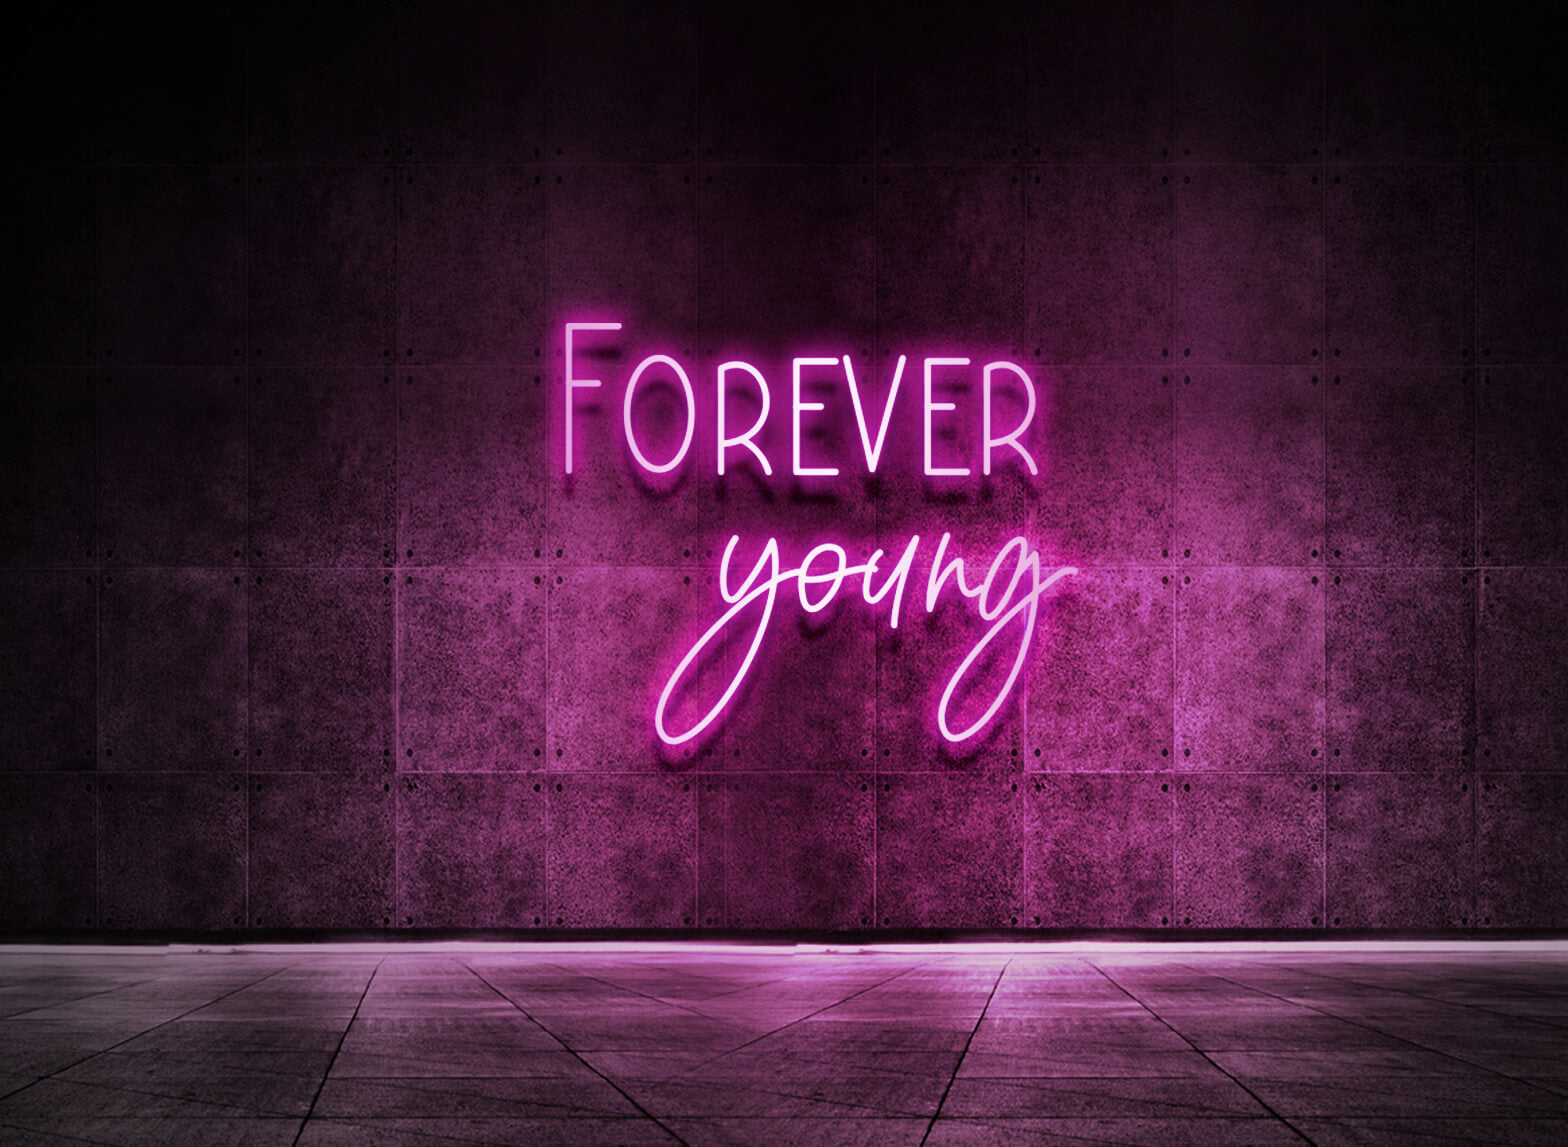 FOREVER YOUNG